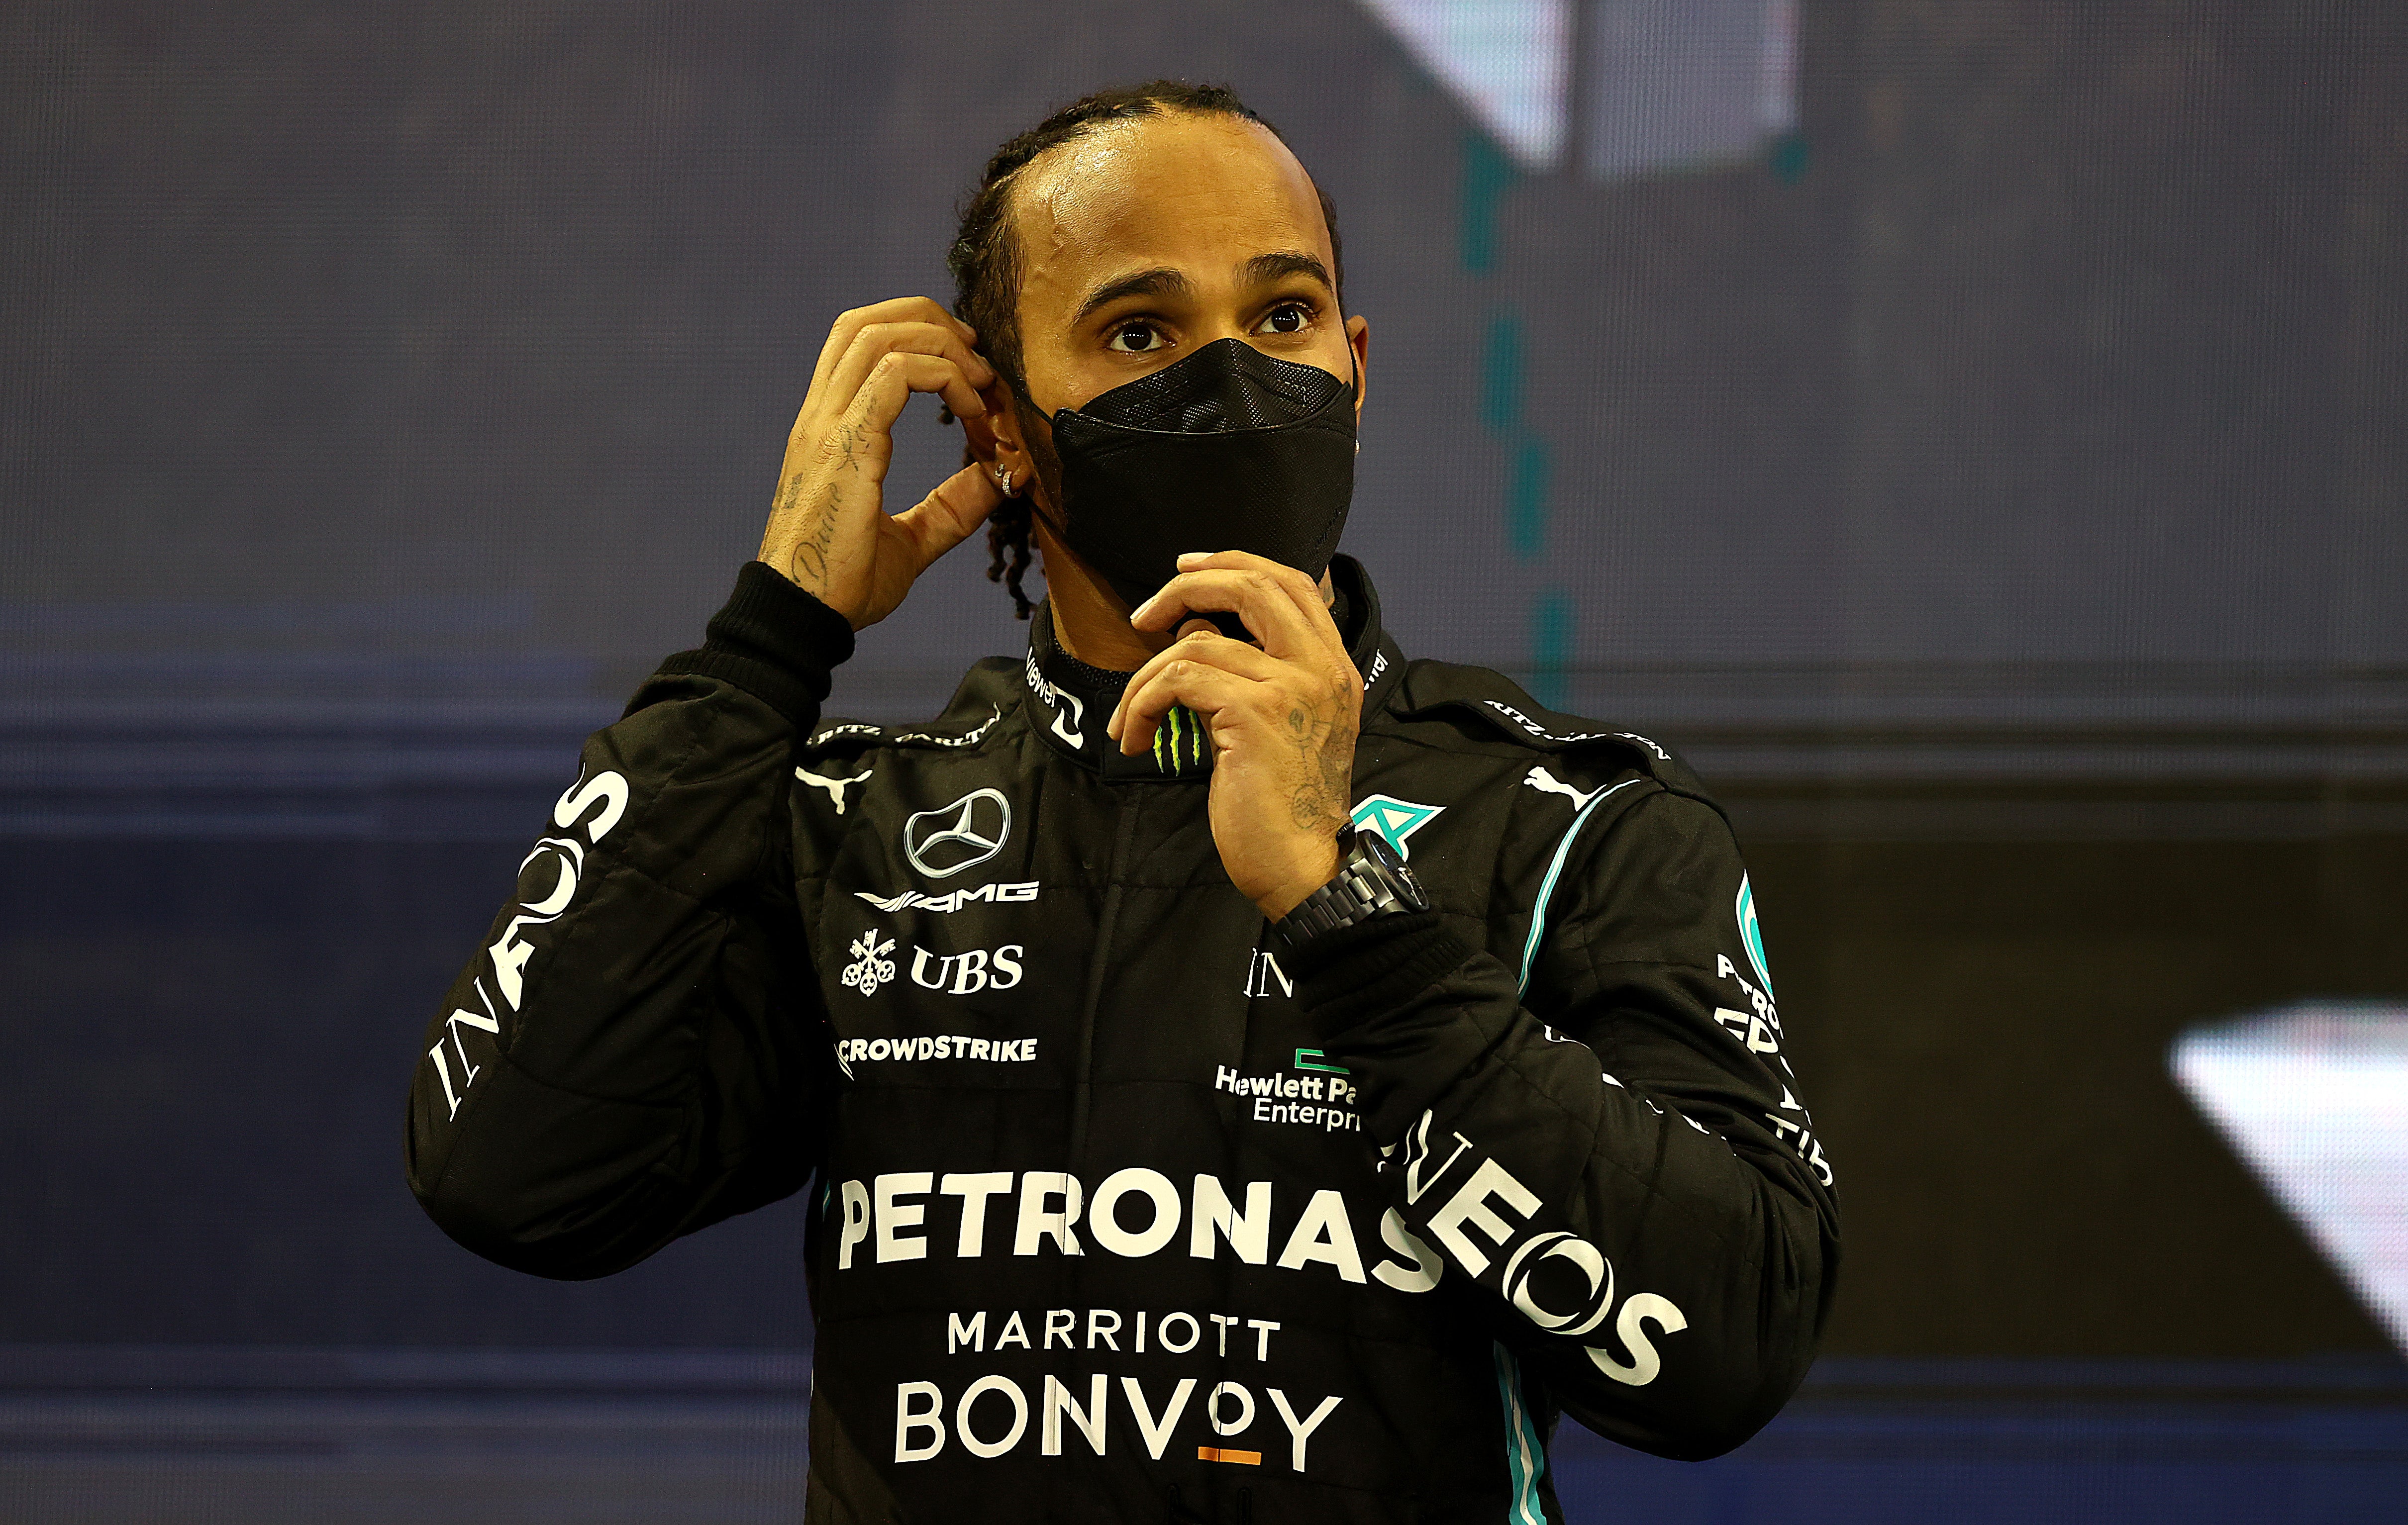 Hamilton’s immediate future remains clouded in uncertainty